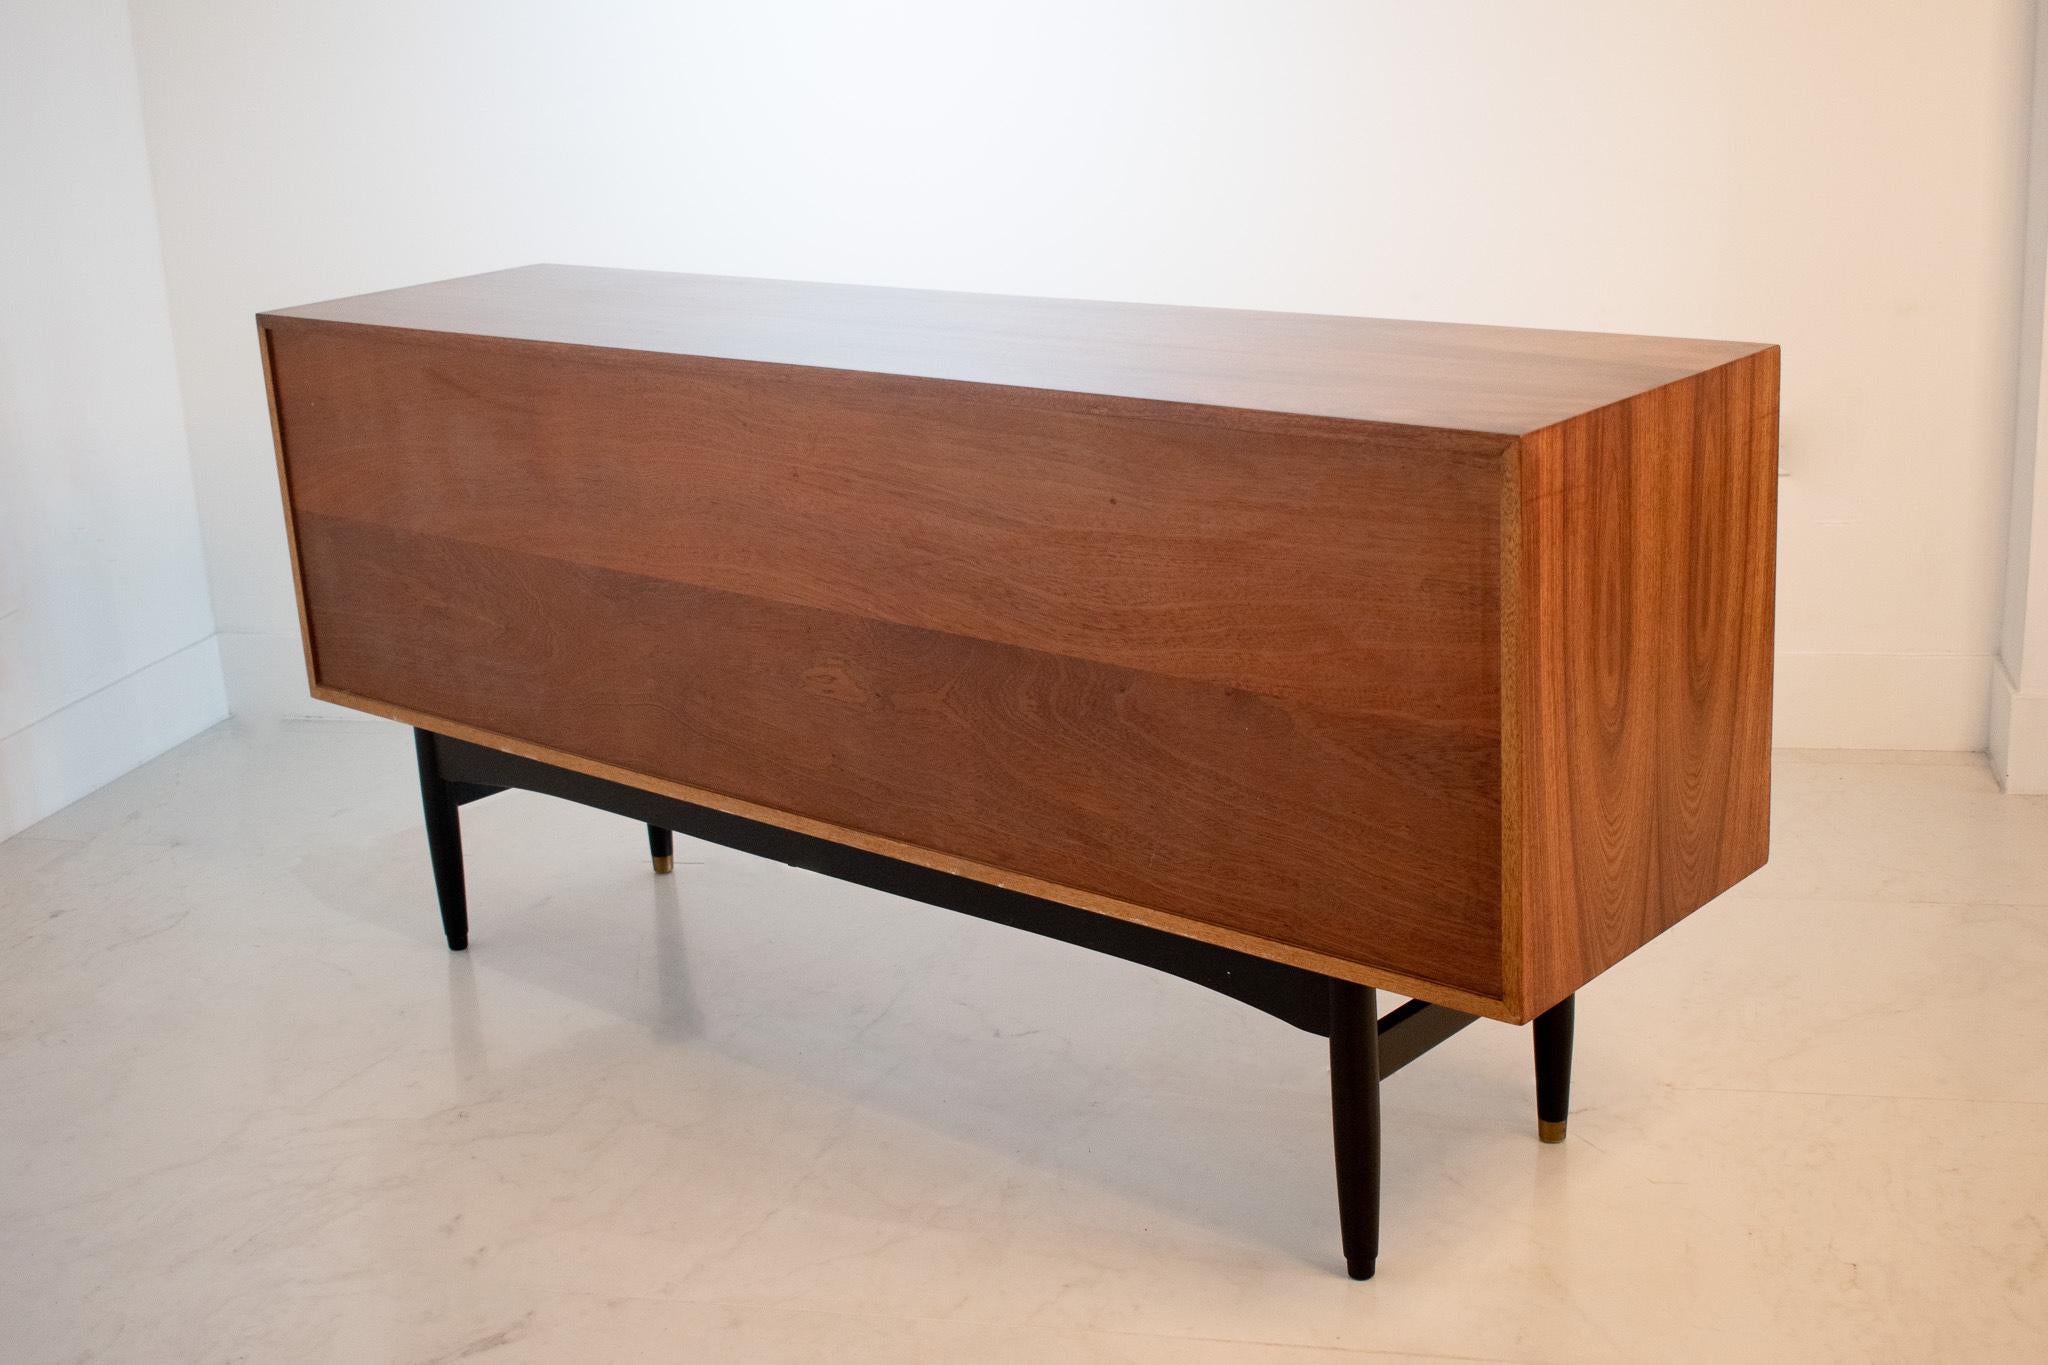 British 1950s Rosewood & Leather Sideboard by Robin Day for Hille